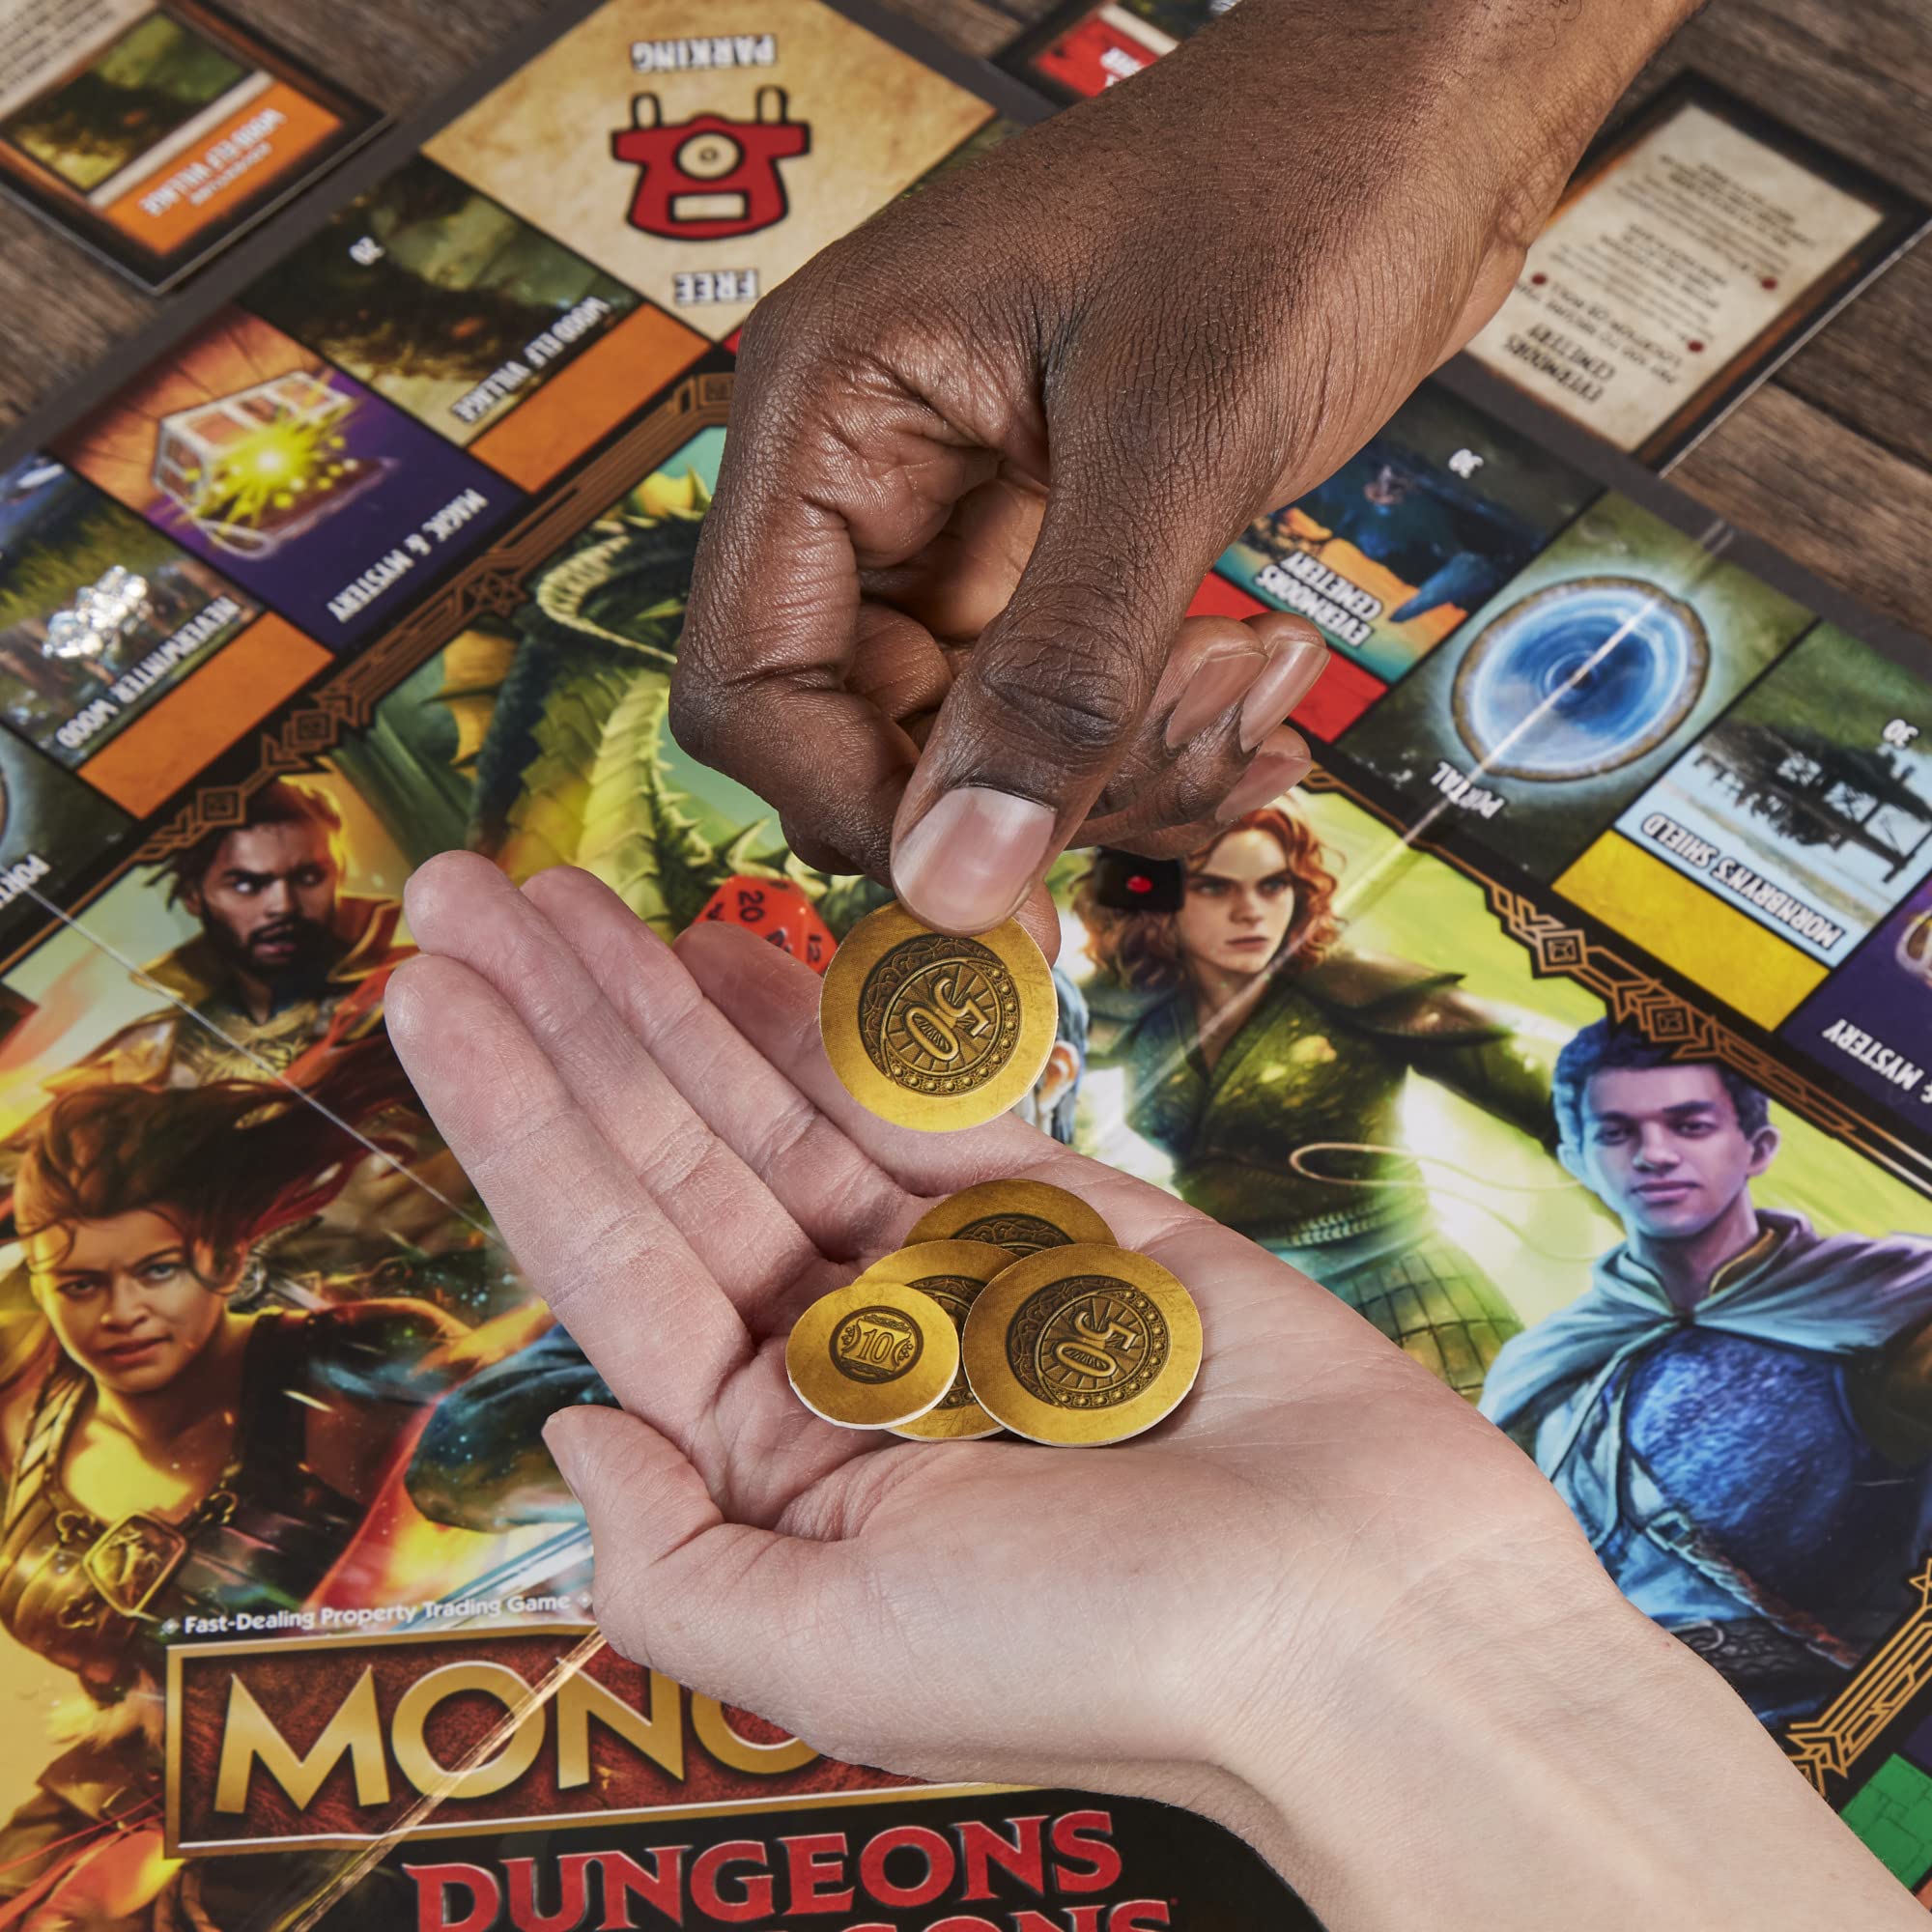 Monopoly Dungeons & Dragons: Honor Among Thieves Game, Inspired by The D&D Movie, Monopoly D&D Board Game for 2-5 Players, Ages 8 and Up